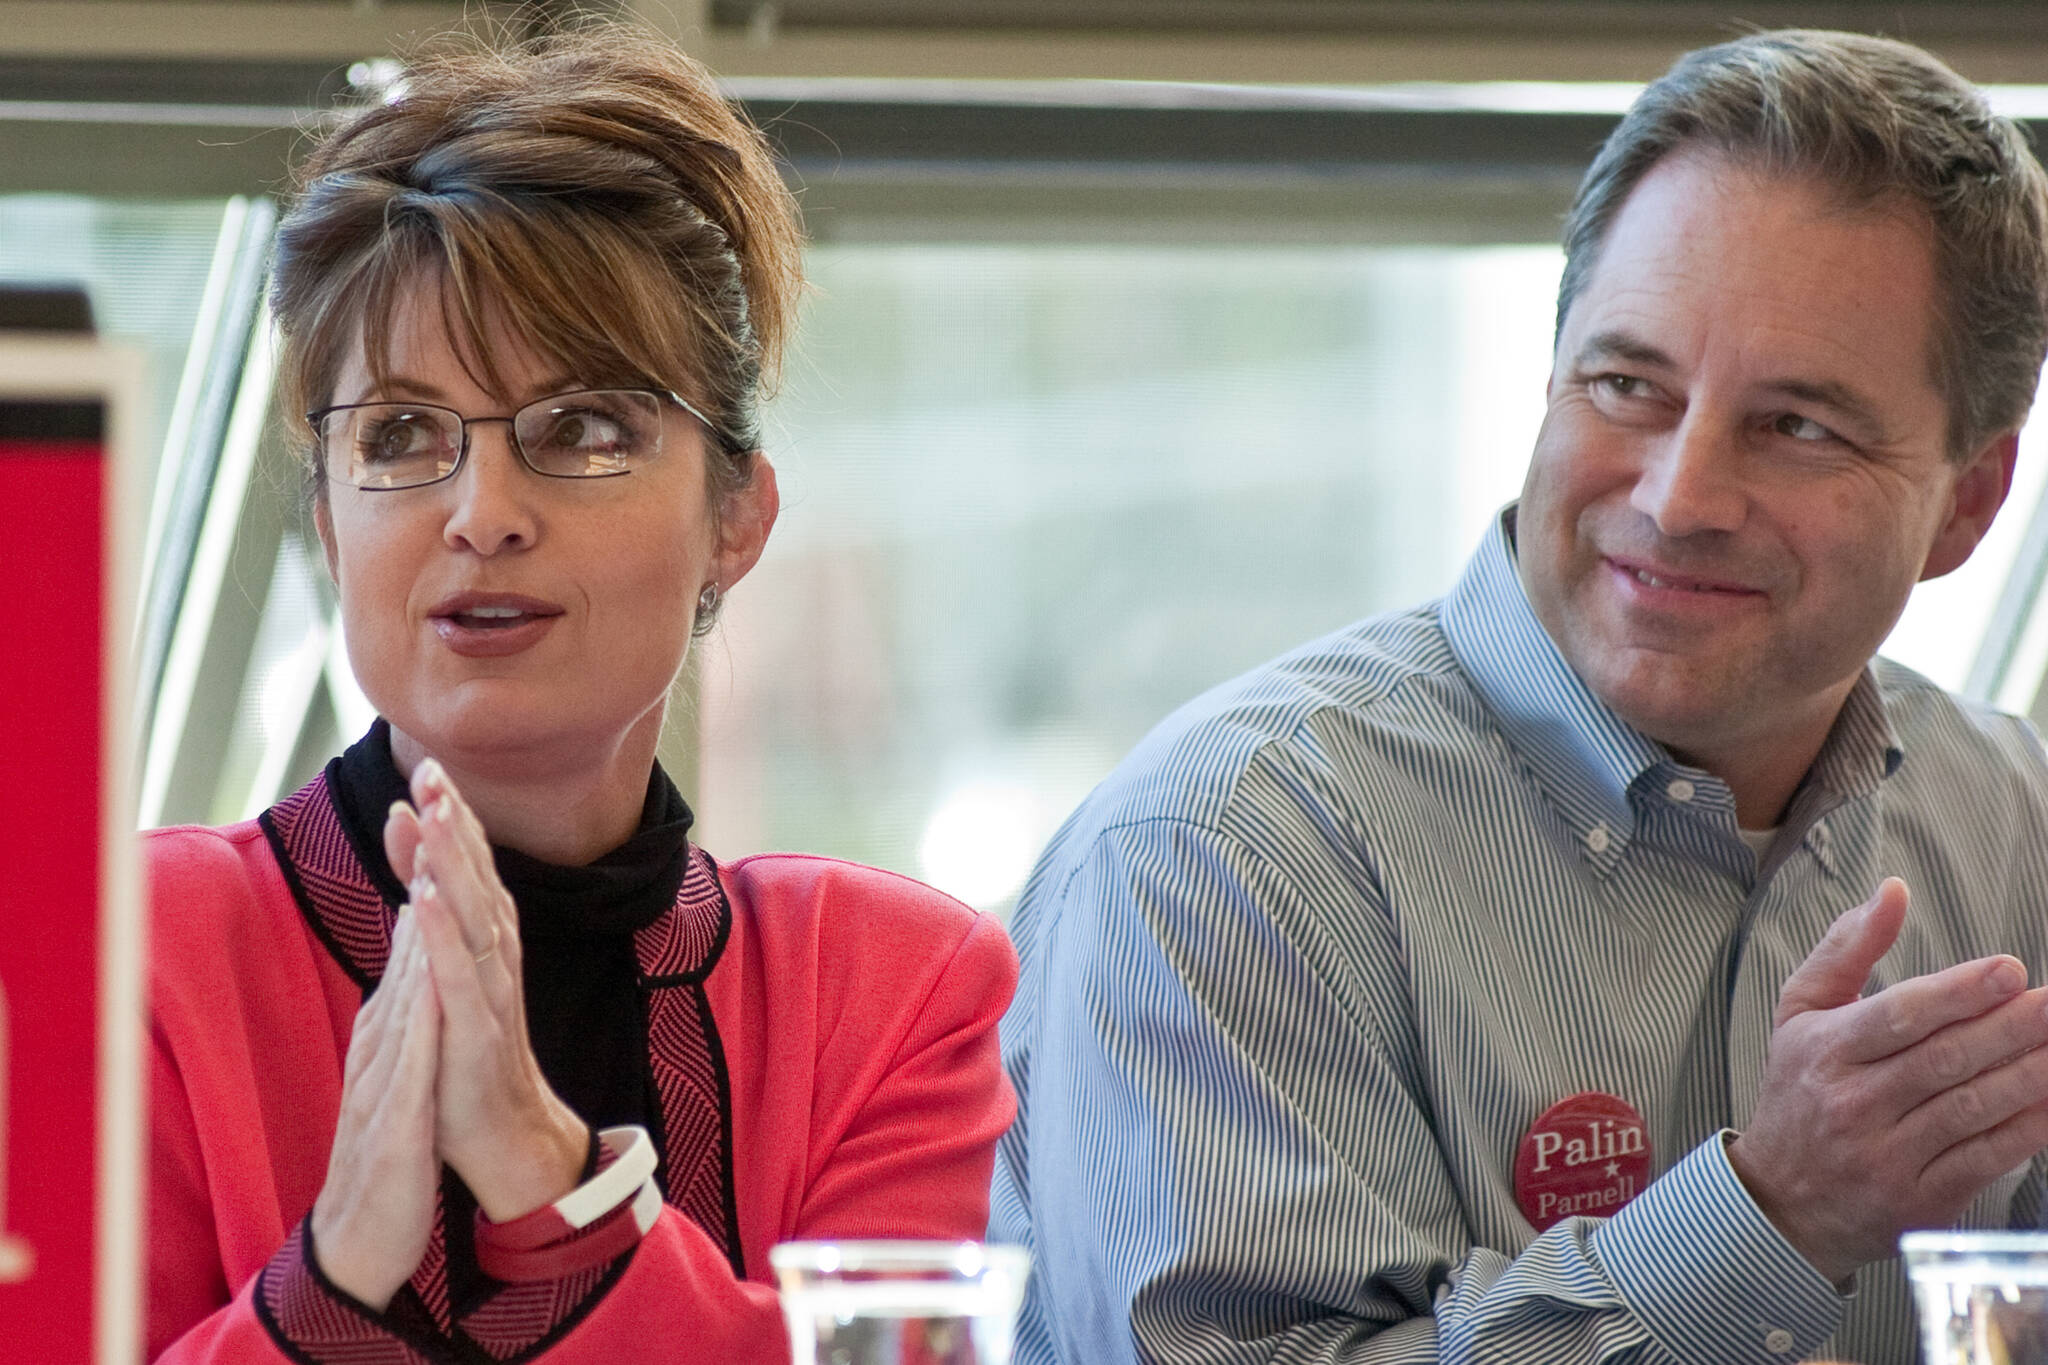 Canidate for Governor Sarah Palin and running mate Sean Parnell listen to introductions during a Capital City Republican Women's luncheon at the UAS Recreation Center in September 2006.